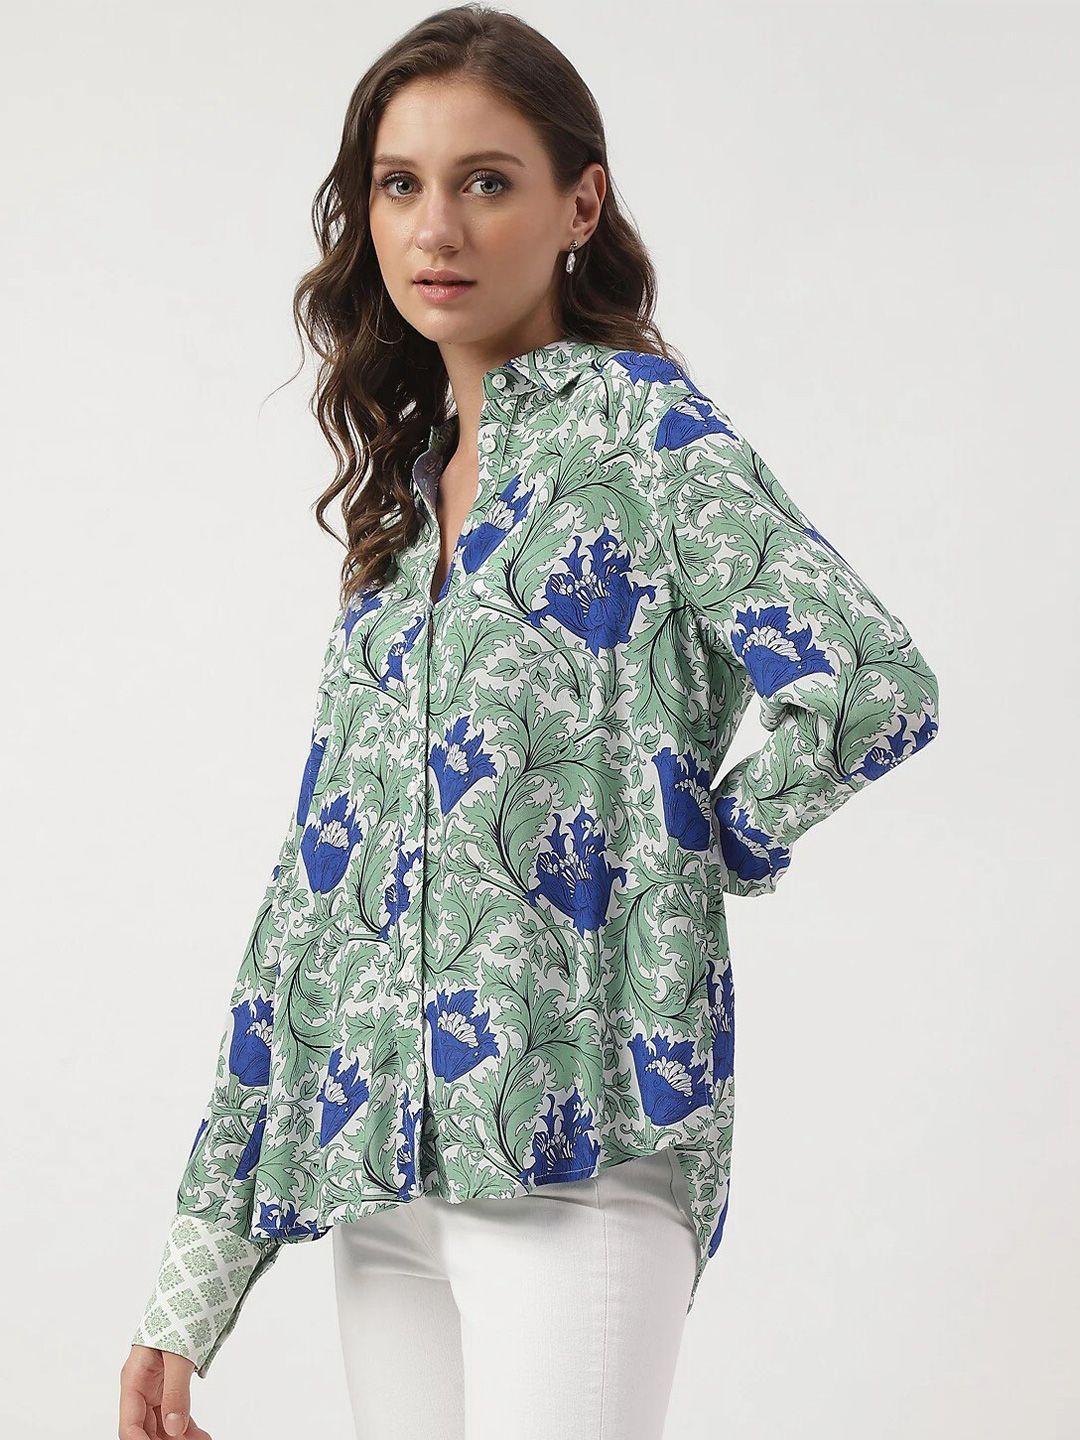 marks & spencer floral printed casual shirt